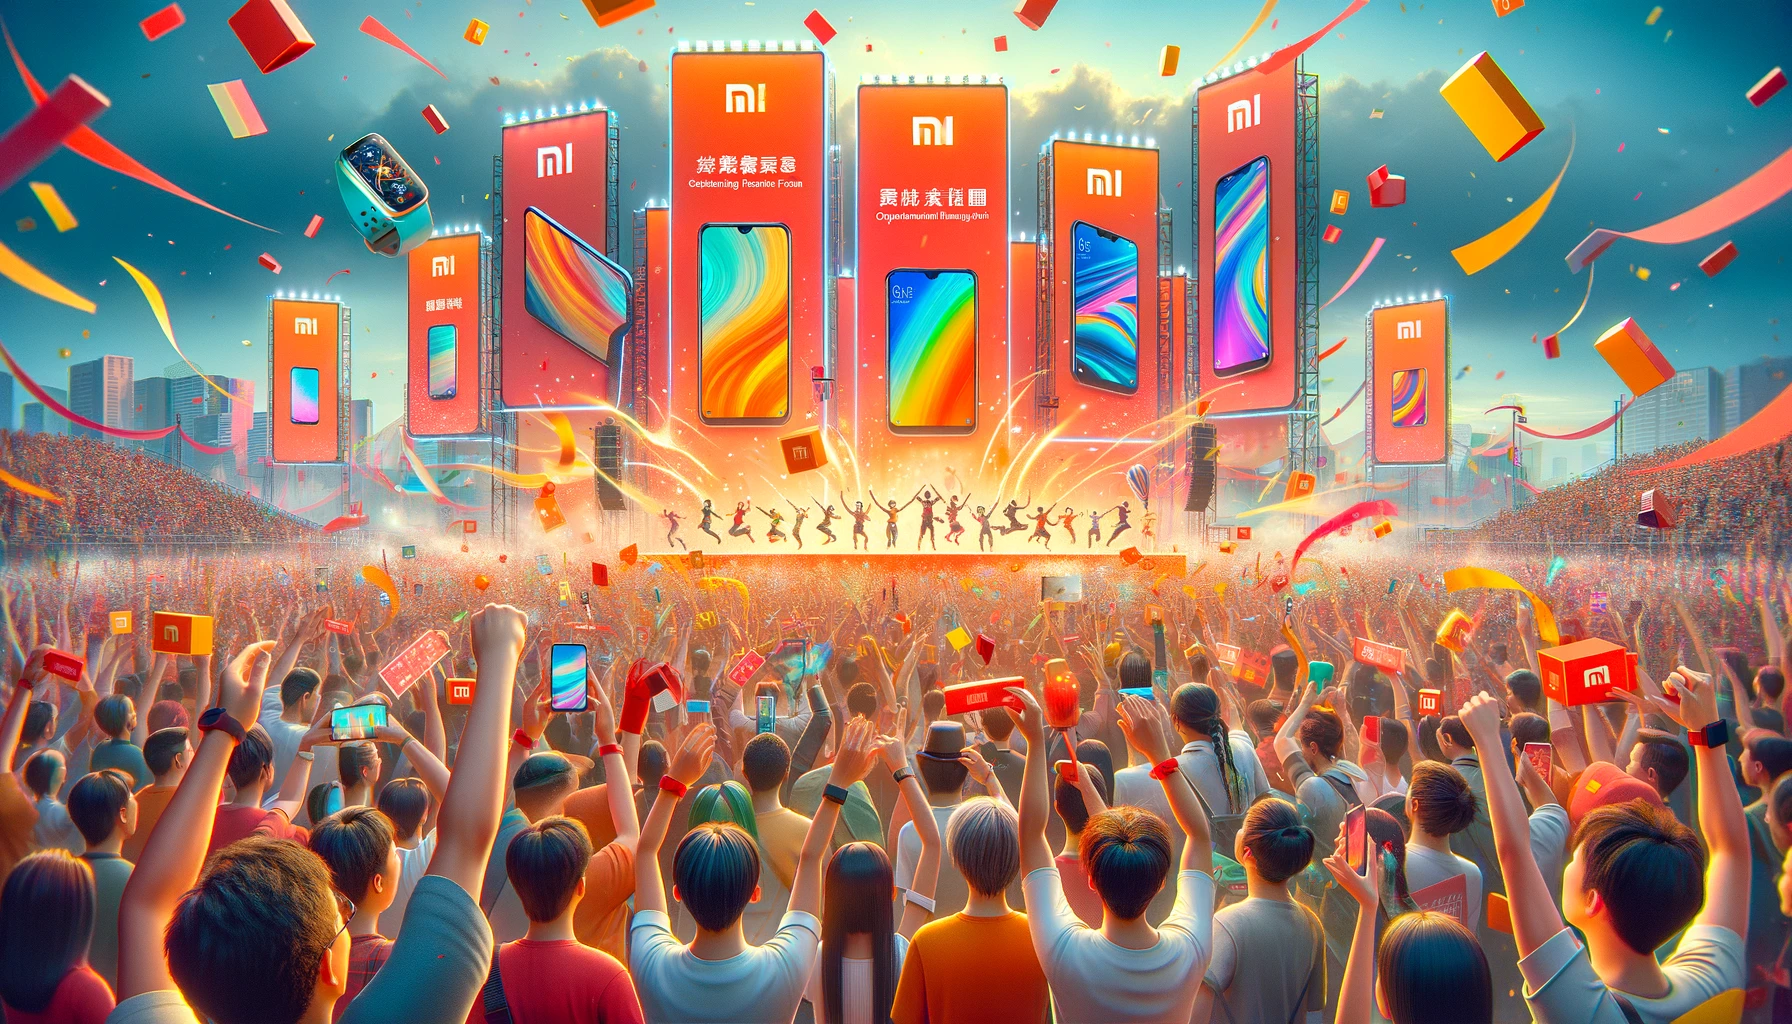 They capture the festive spirit and celebration of the Xiaomi community.